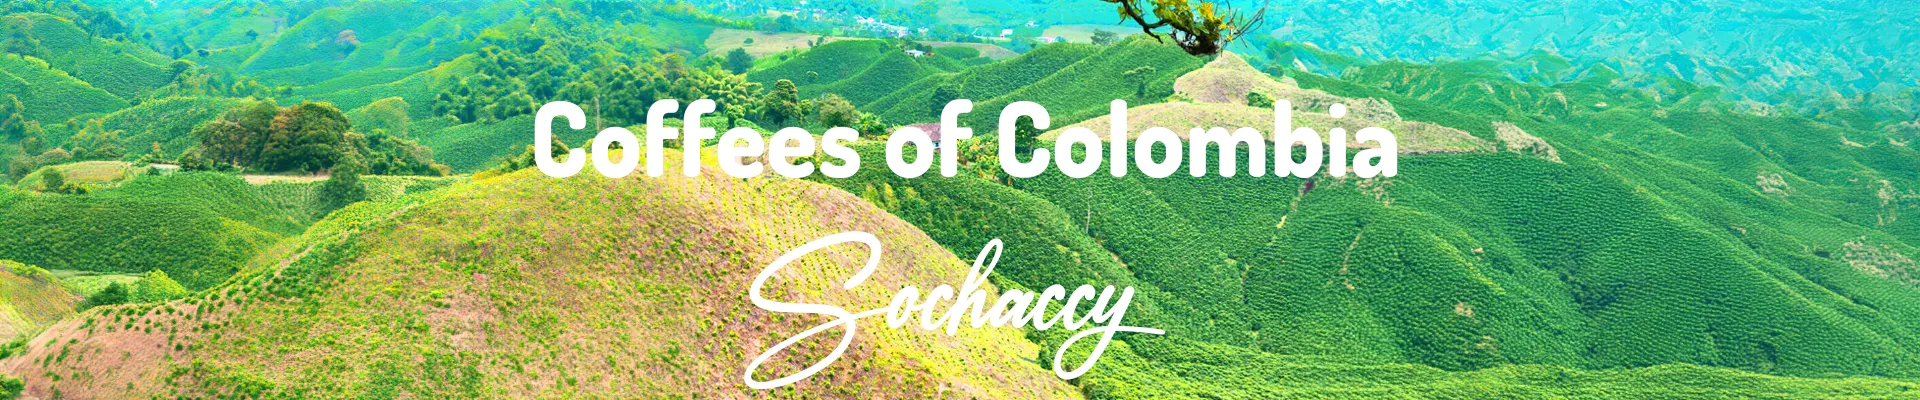 Coffees of Colombia